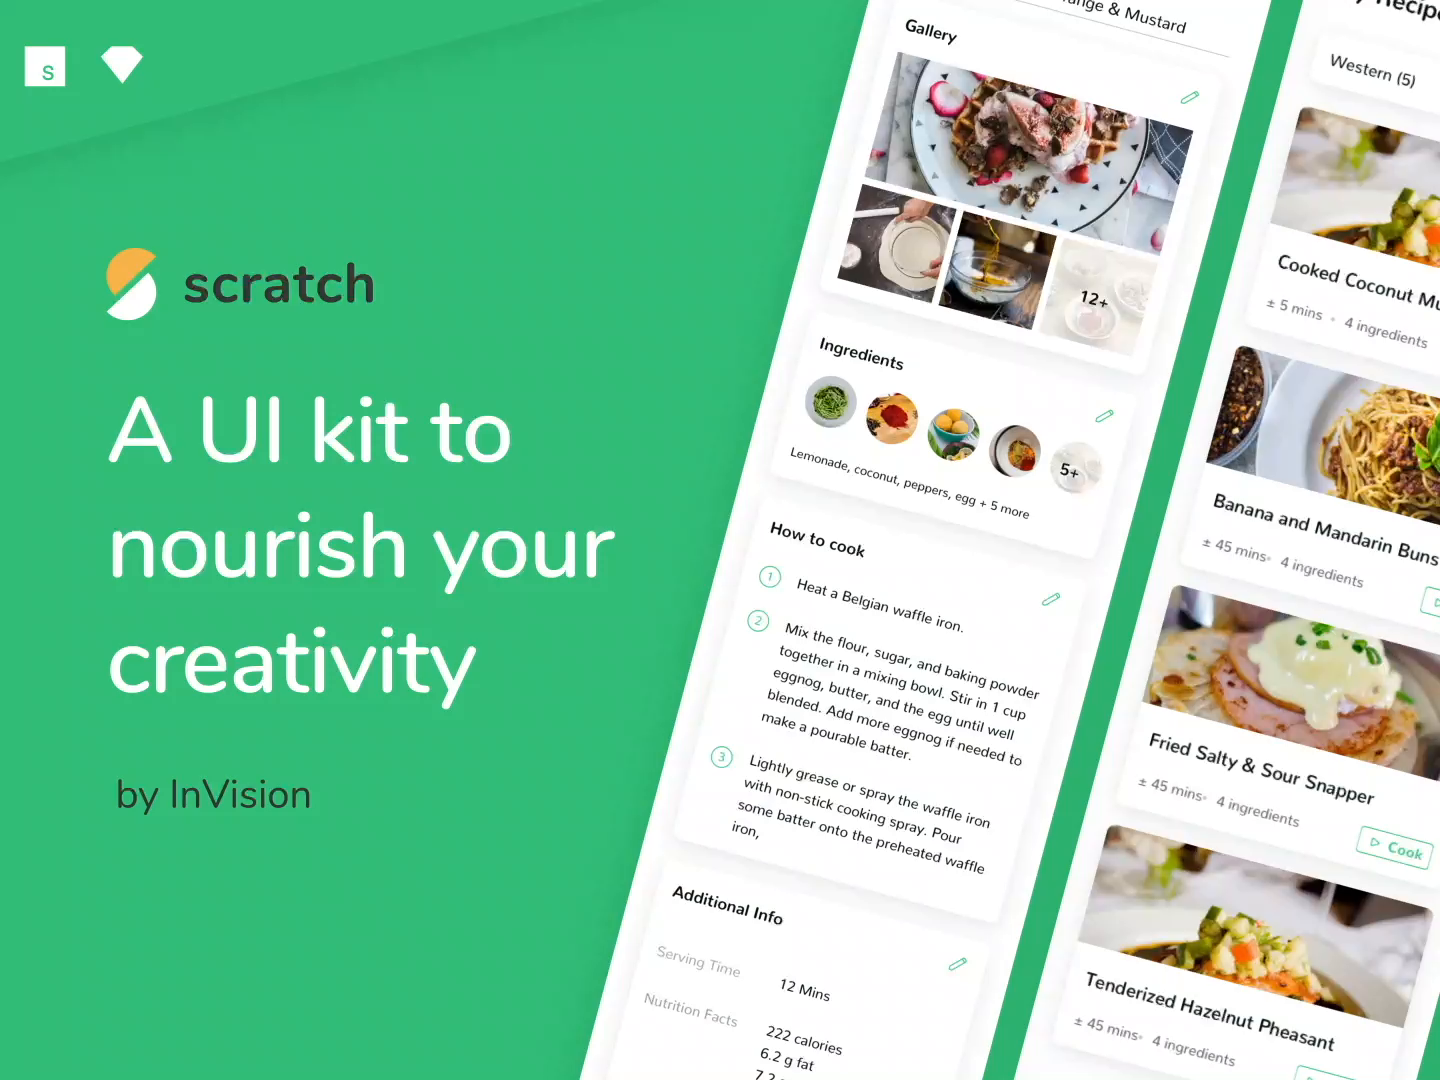 UI Kits design idea #225: Scratch—A UI Kit to nourish your creativity by InVision